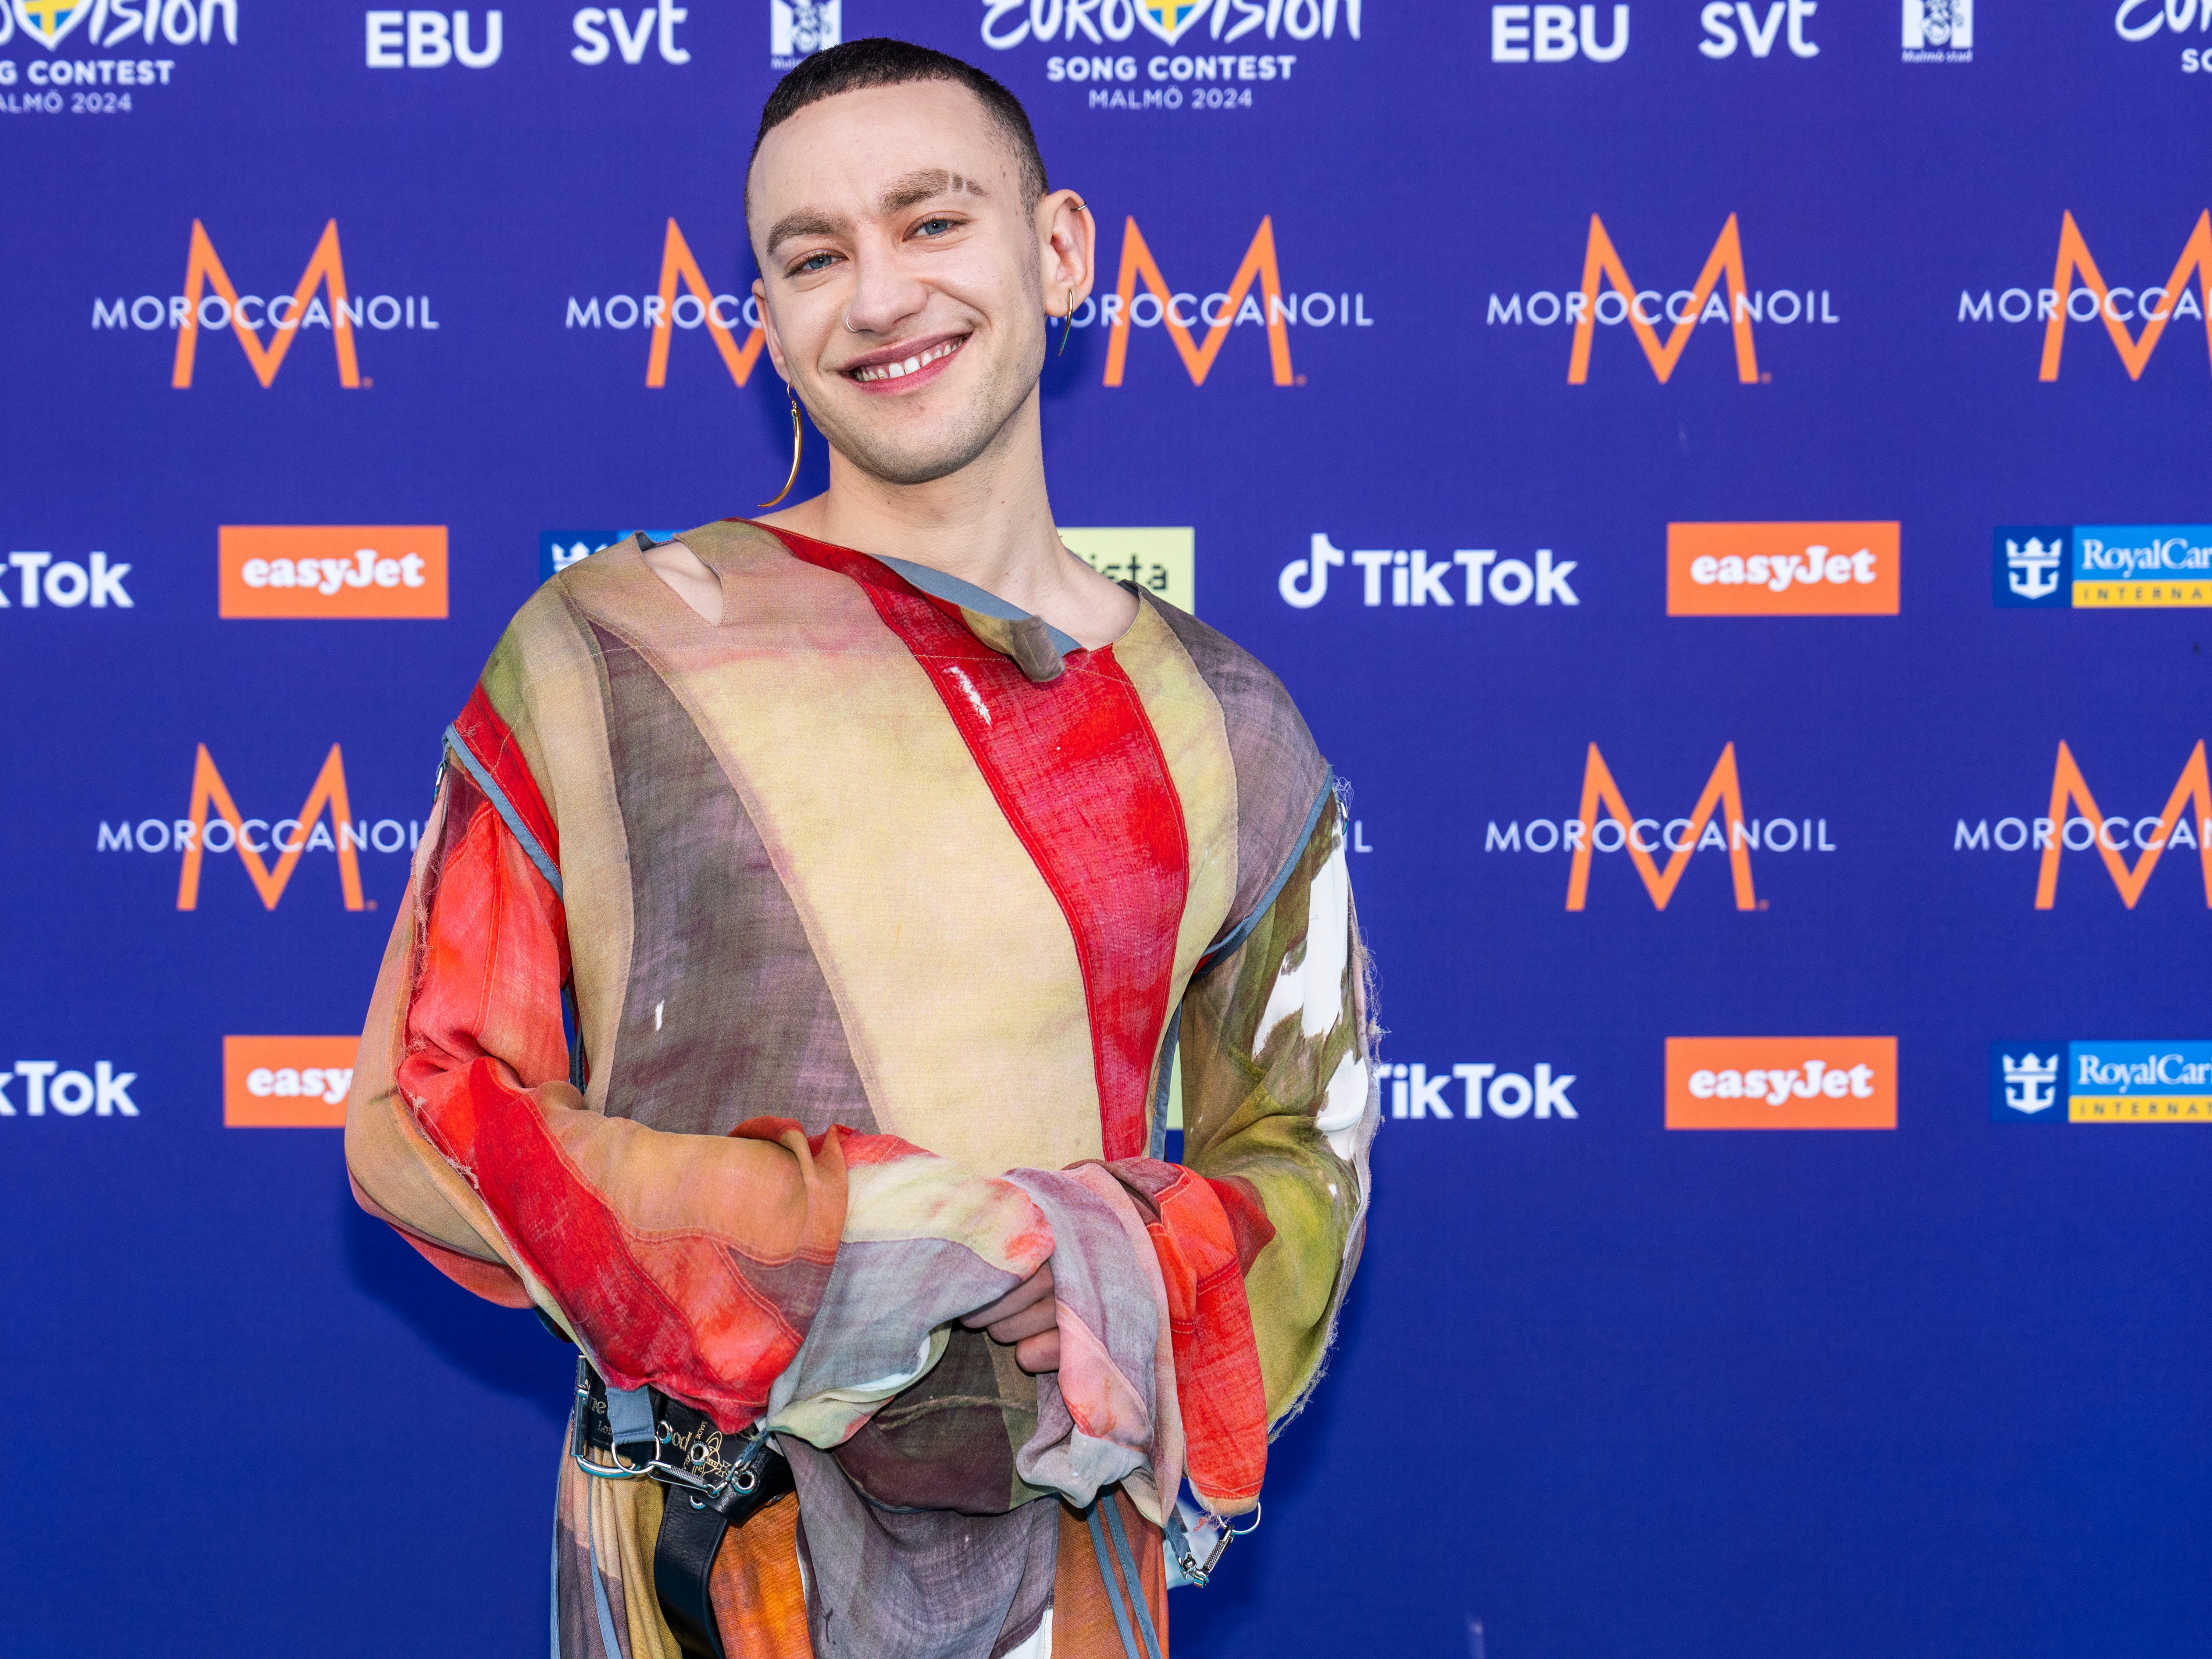 Olly Alexander on the turquoise carpet at the 68th Eurovision Song Contest in Malmo, Sweden